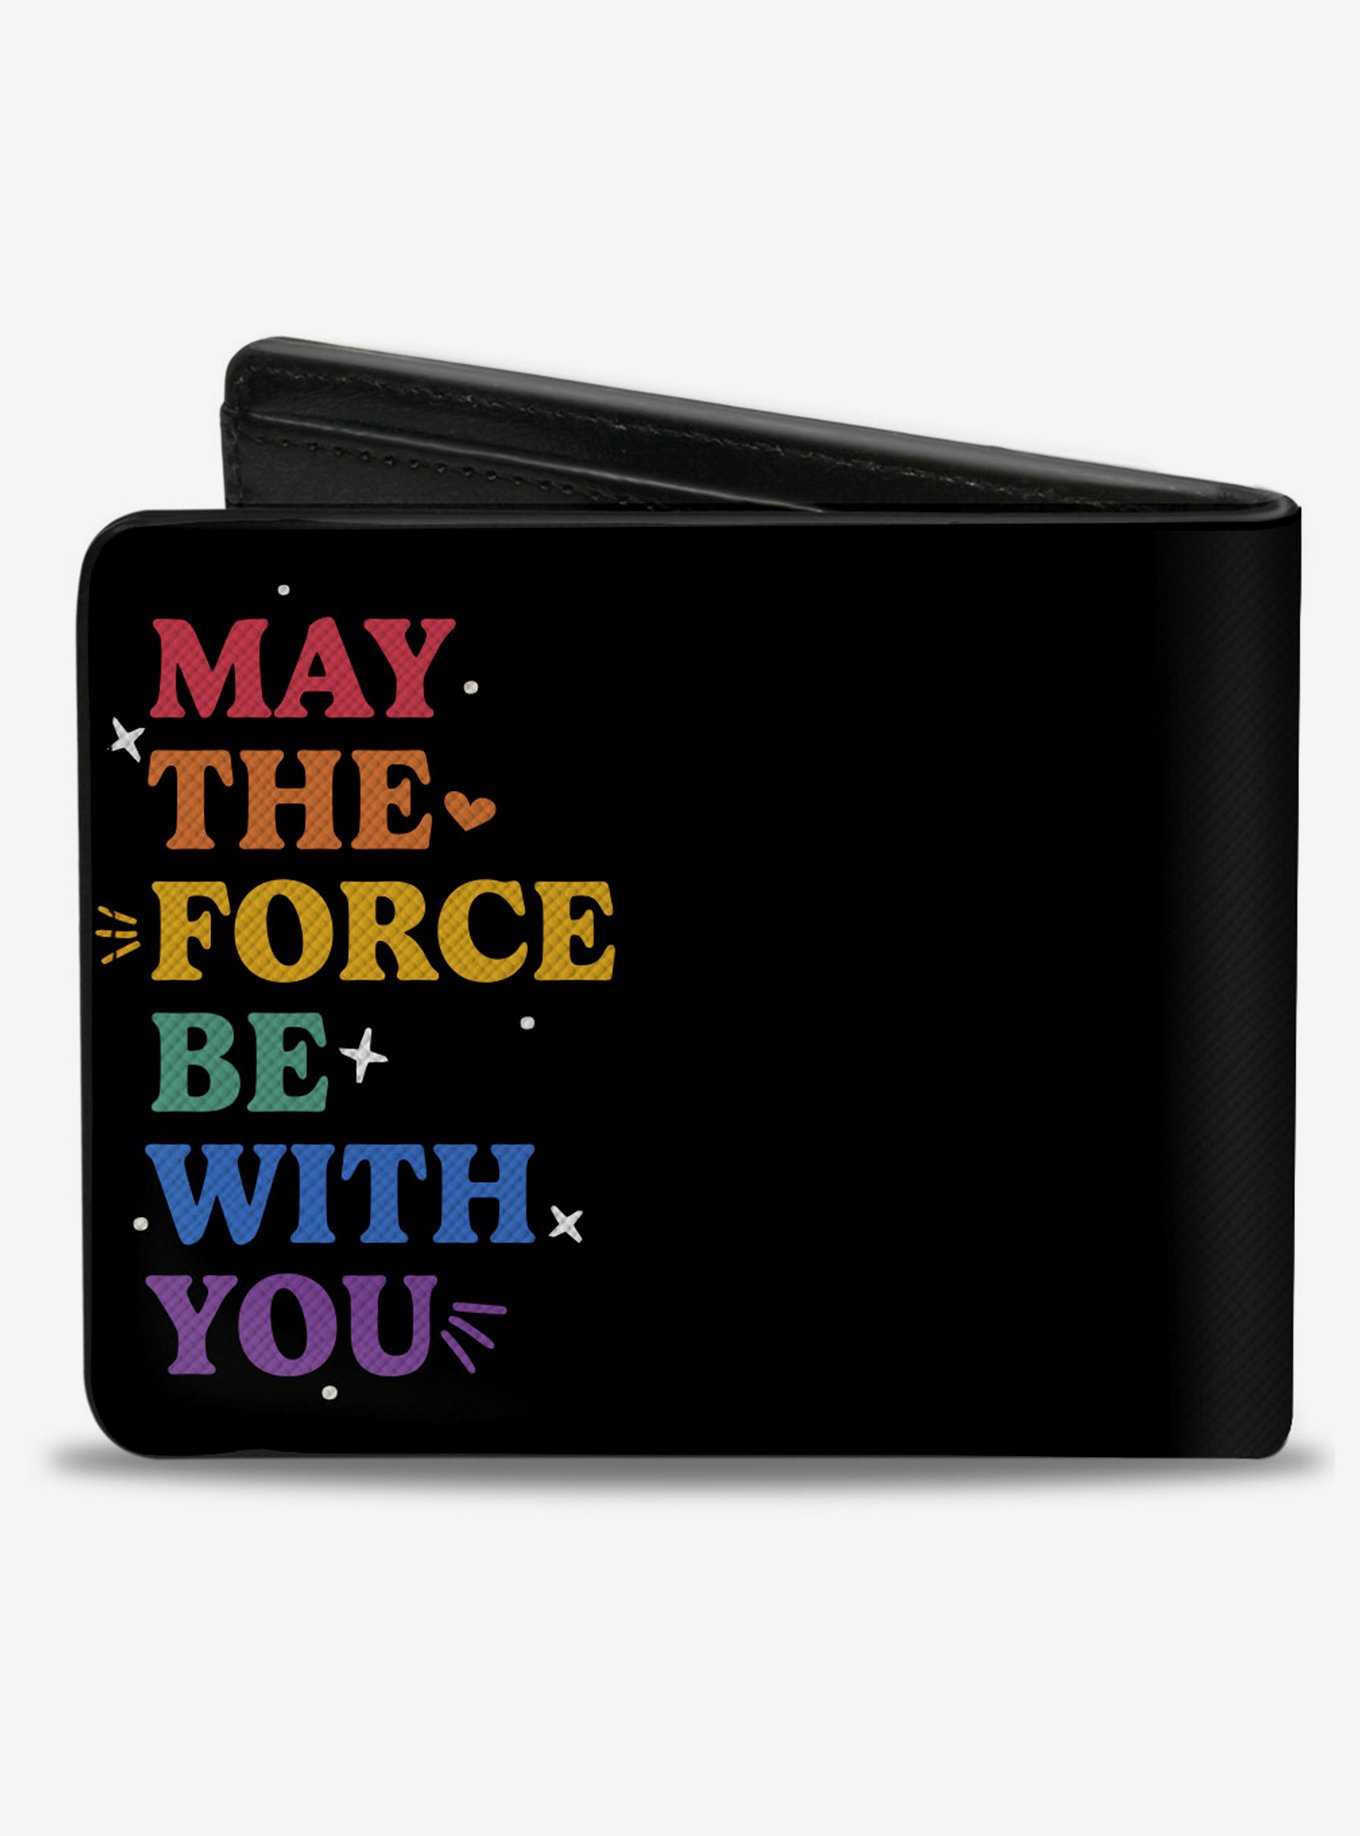 Star Wars Pride May the Force Be With You Quote Bifold Wallet, , hi-res